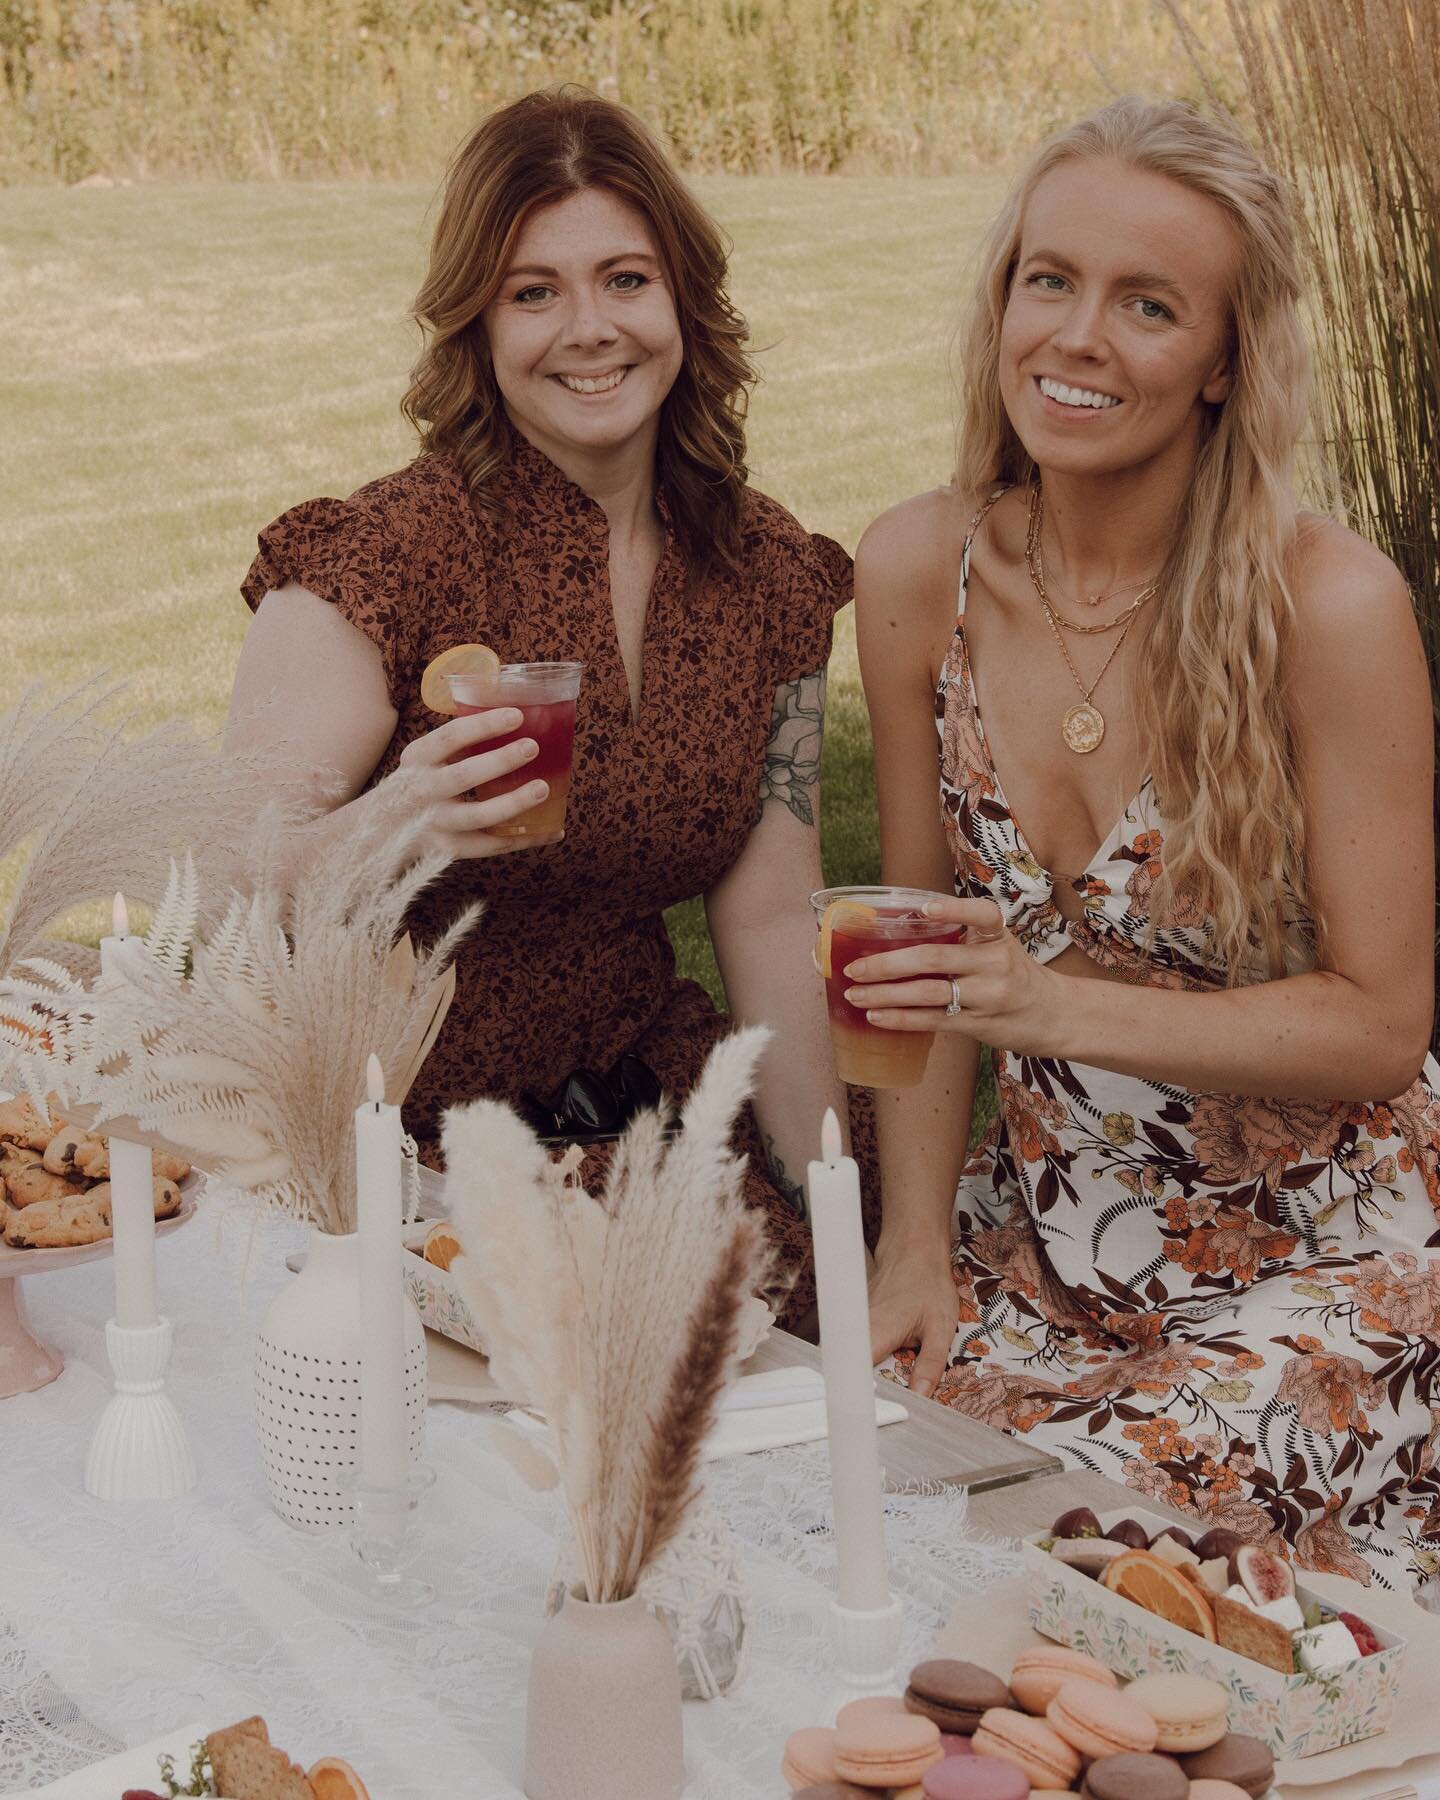 We&rsquo;re always down for having a good time and styling a pretty party with a cocktail (or mocktail!) in hand 🥂

Your party BFF&rsquo;s,
Alysha + Katrina